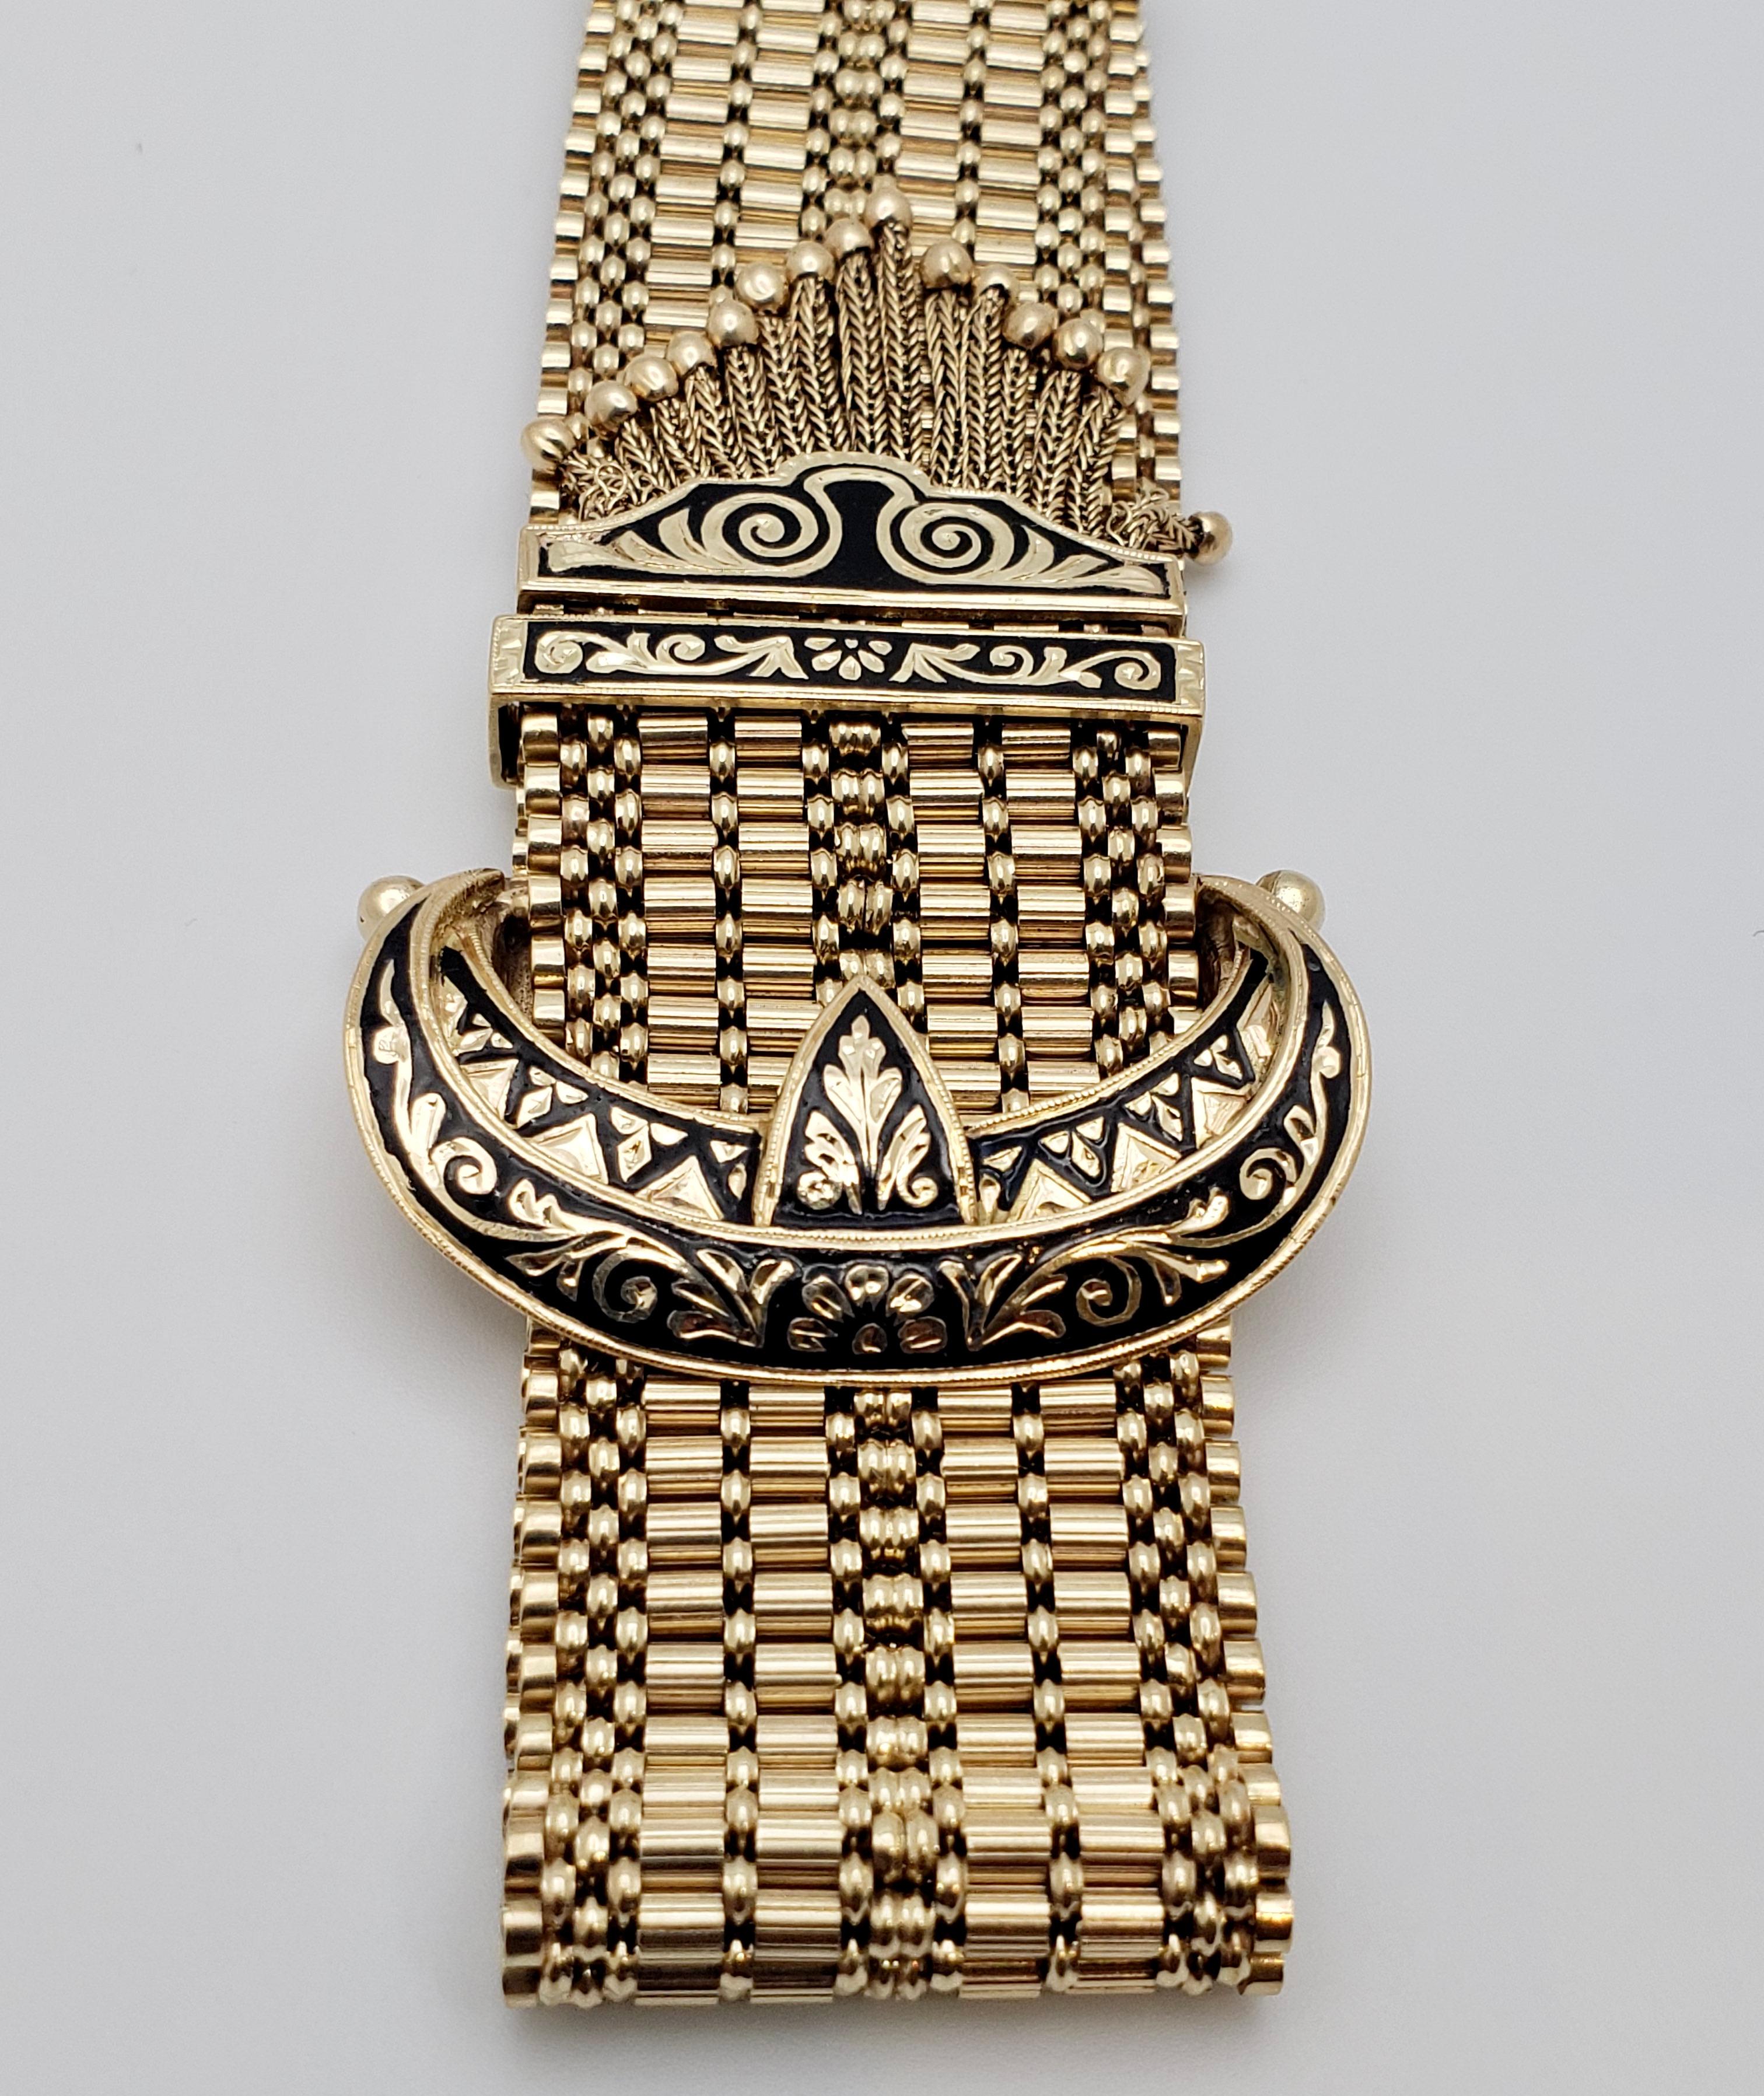 An authentic 14K yellow gold Victorian enamel tassle bracelet. The gold-mesh bracelet ends off with multi-fringed tassel and is mounted with a crescent moon-shaped slide-clasp, decorated with black enamel, which is used to adjust the length of the